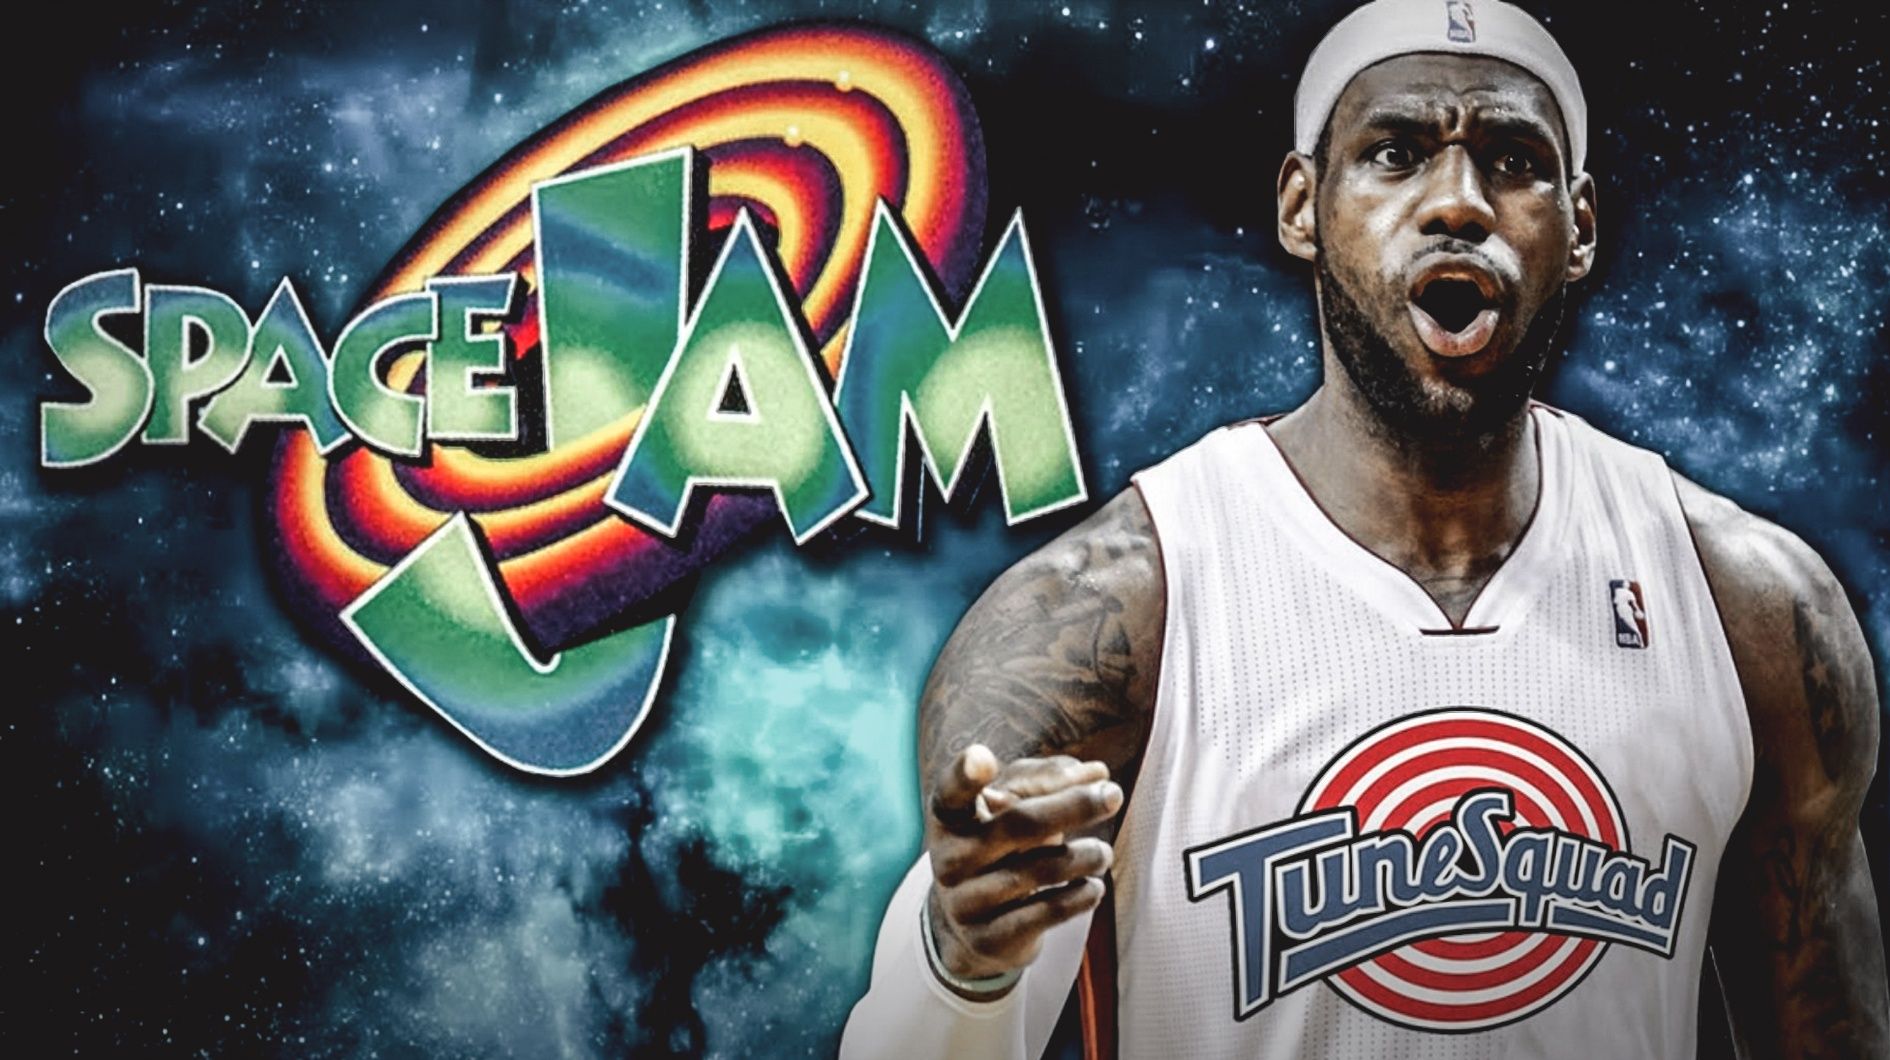 Fan art poster for the Space Jam 2 film with LeBron James